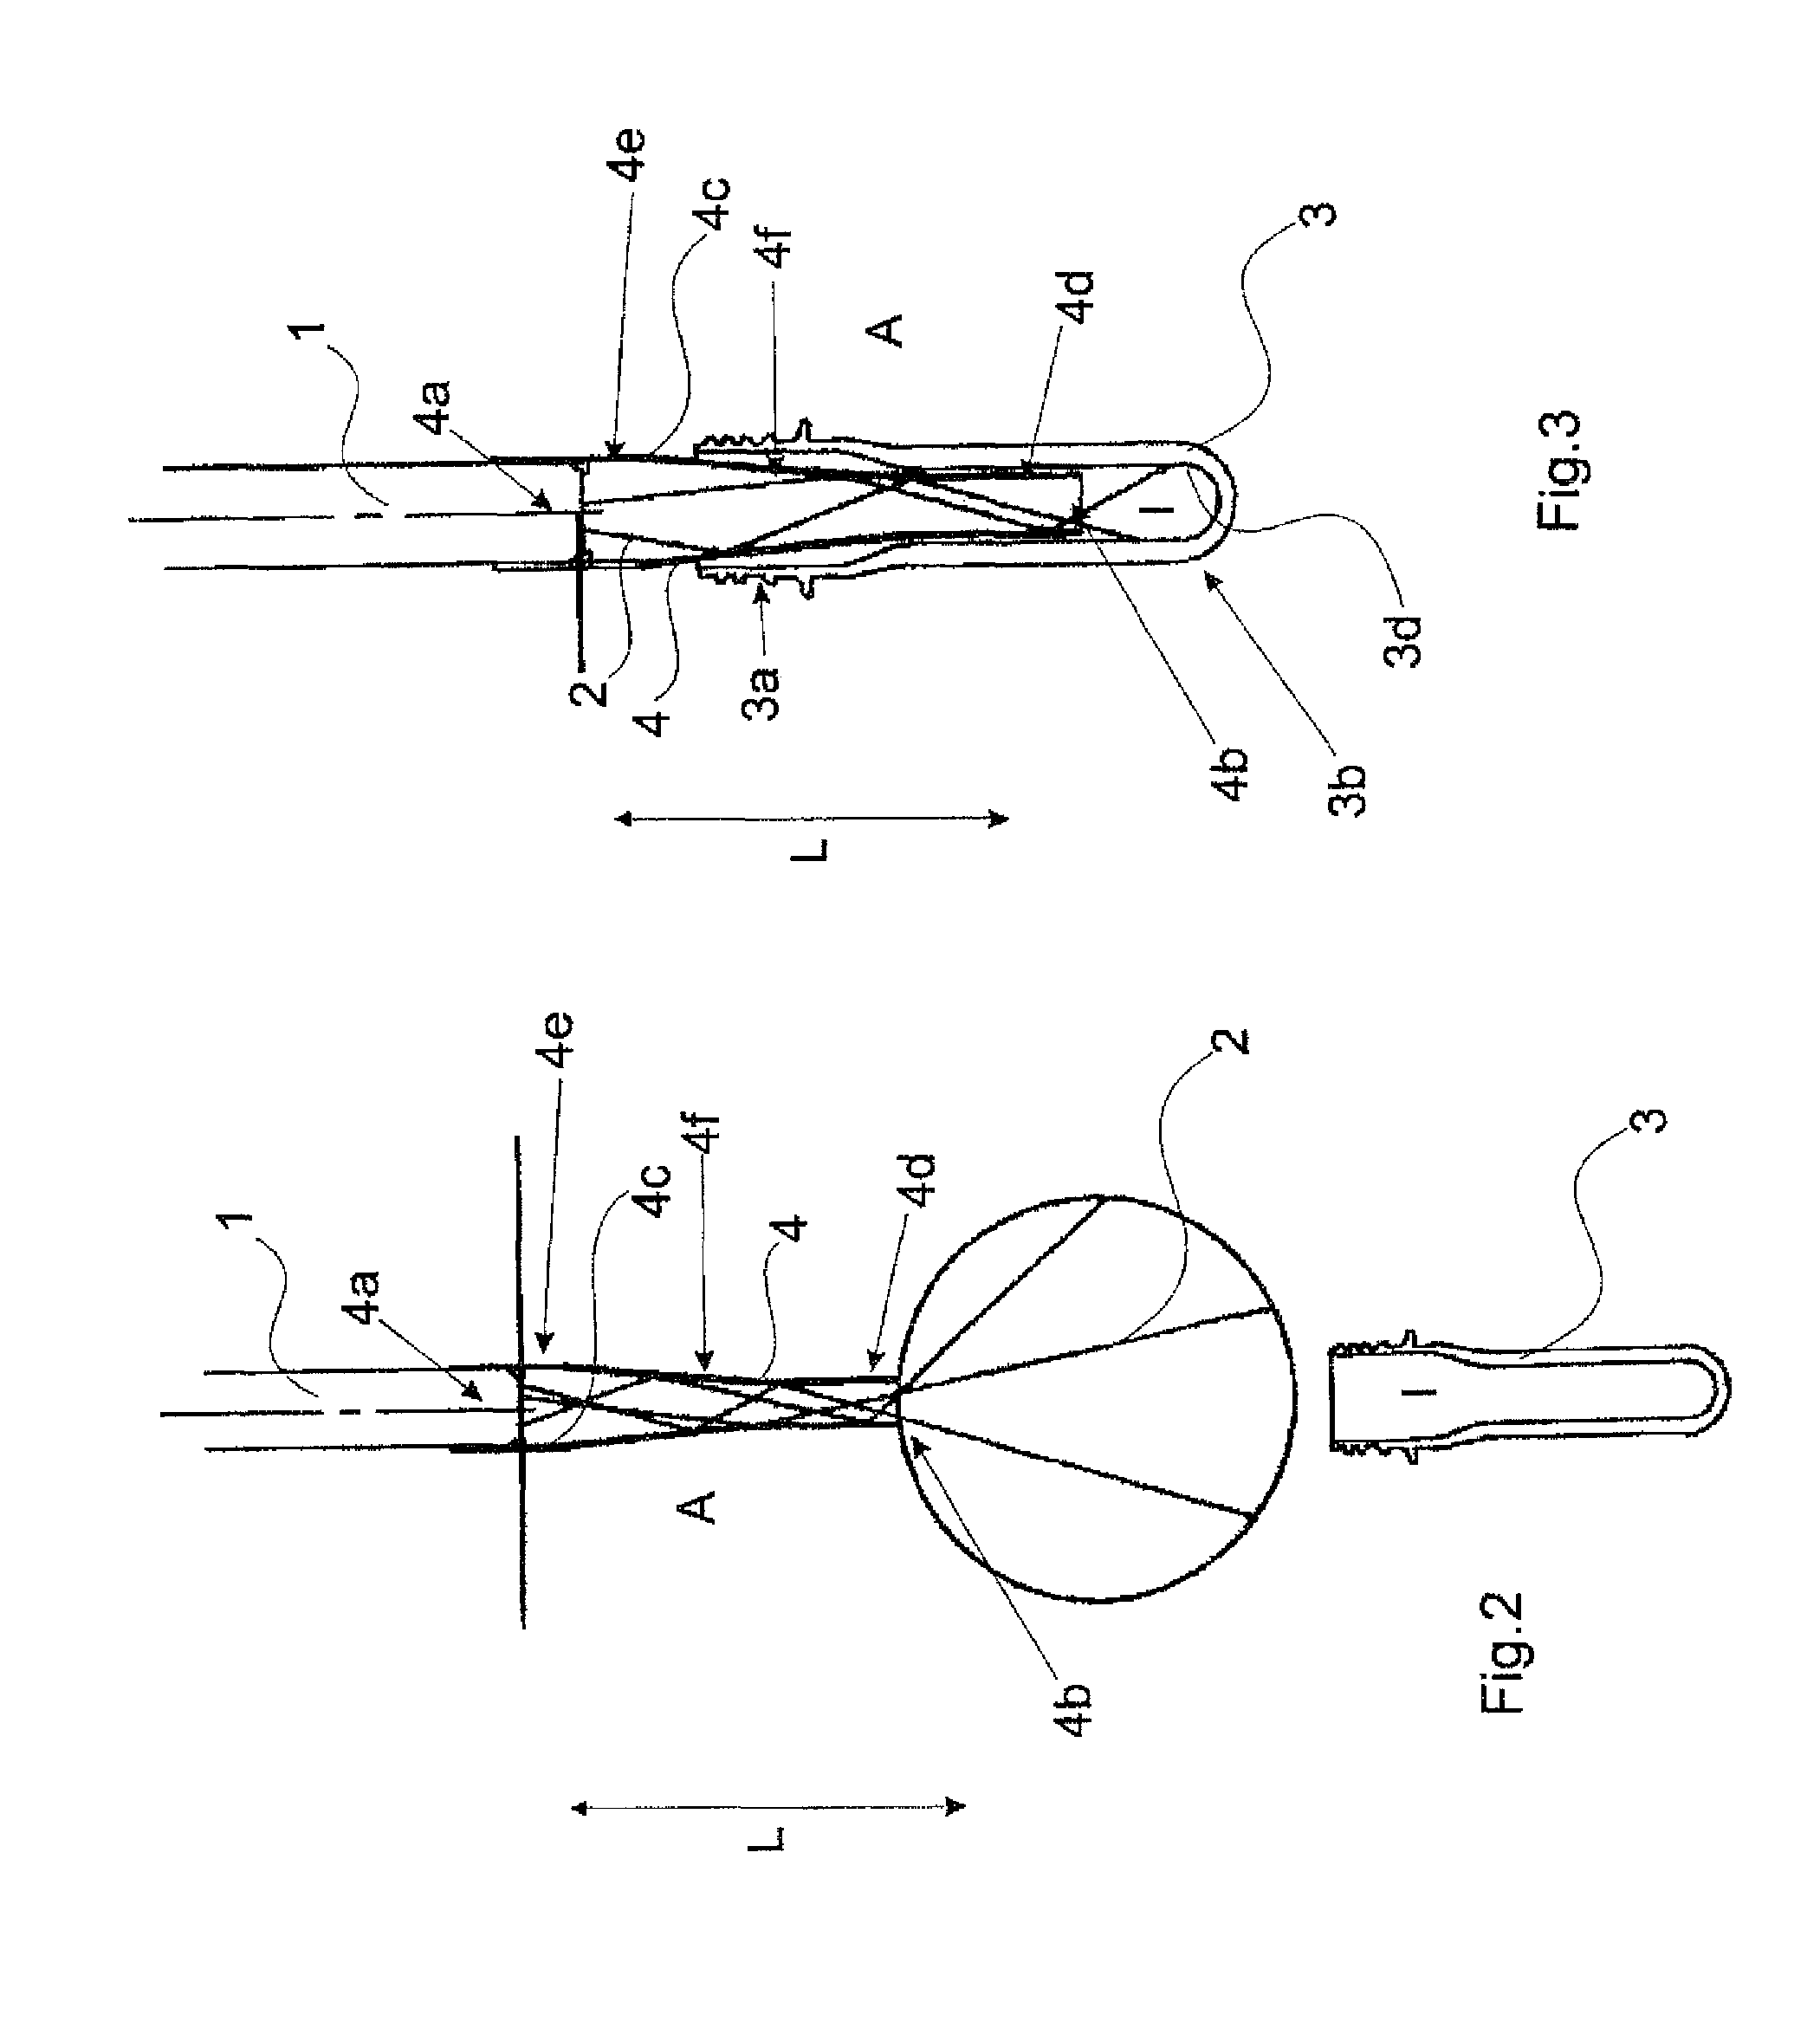 Apparatus and method of sterilizing inner walls of containers with a reflector apparatus